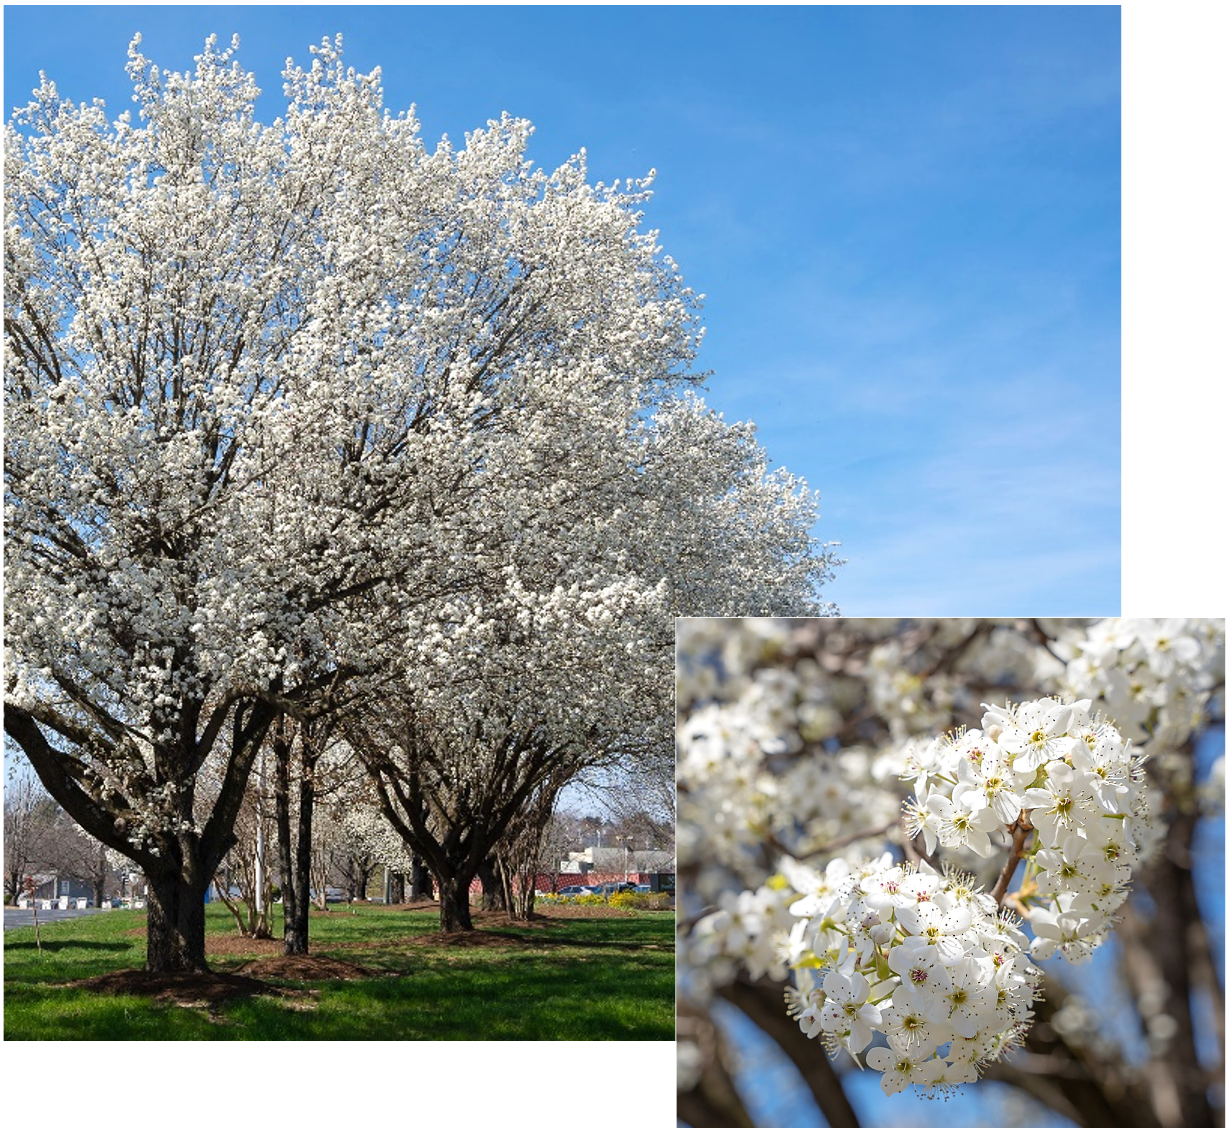 Callery pear trees and a closeup of the tree's blossoms.